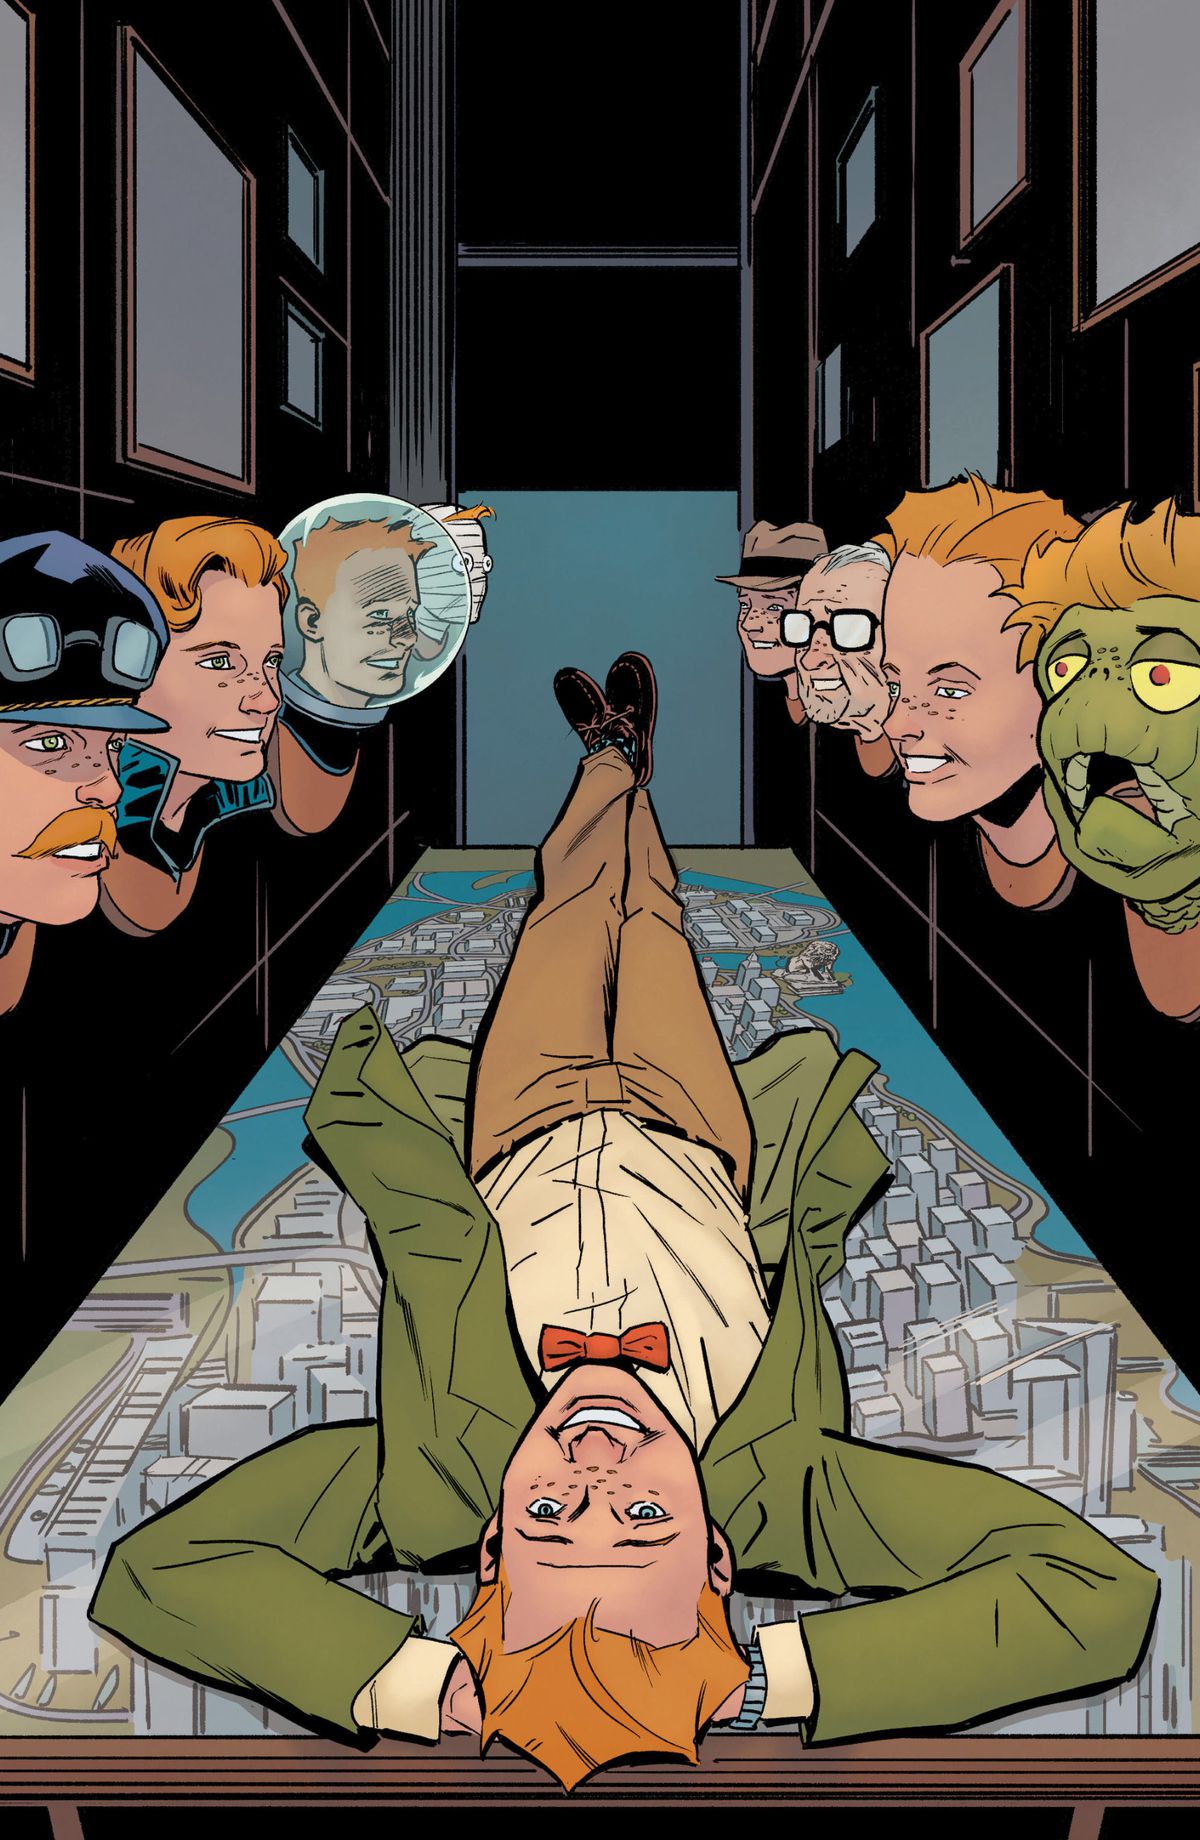 Jimmy Olsen lies supine, hands behind his smiling head on top of a map of Metropolis. He is overlooked by mounted trophy heads of himself in various disguises and transformations, on the cover of Superman’s Pal Jimmy Olsen (2020).